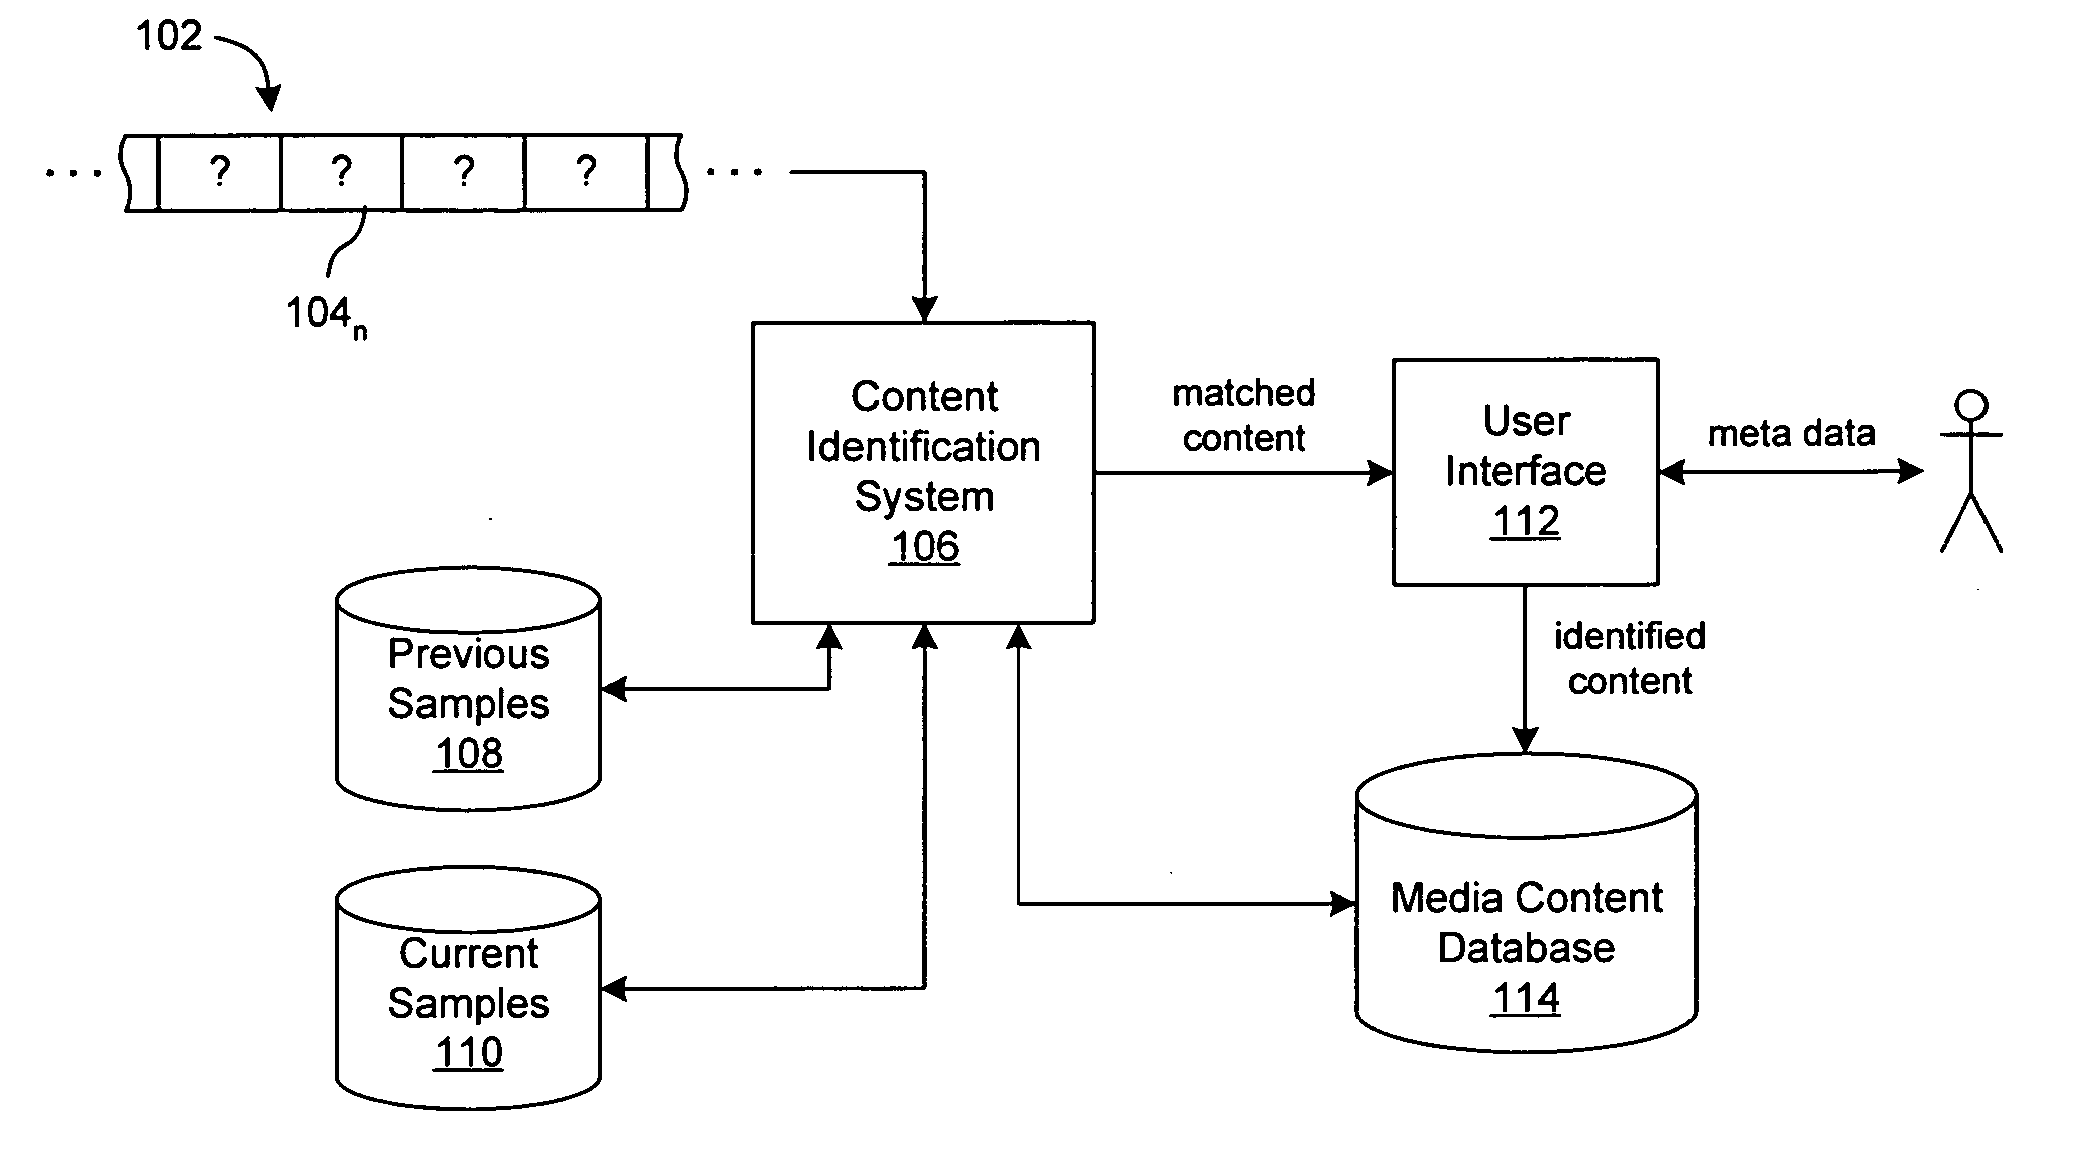 Generation of a media content database by correlating repeating media content in media streams